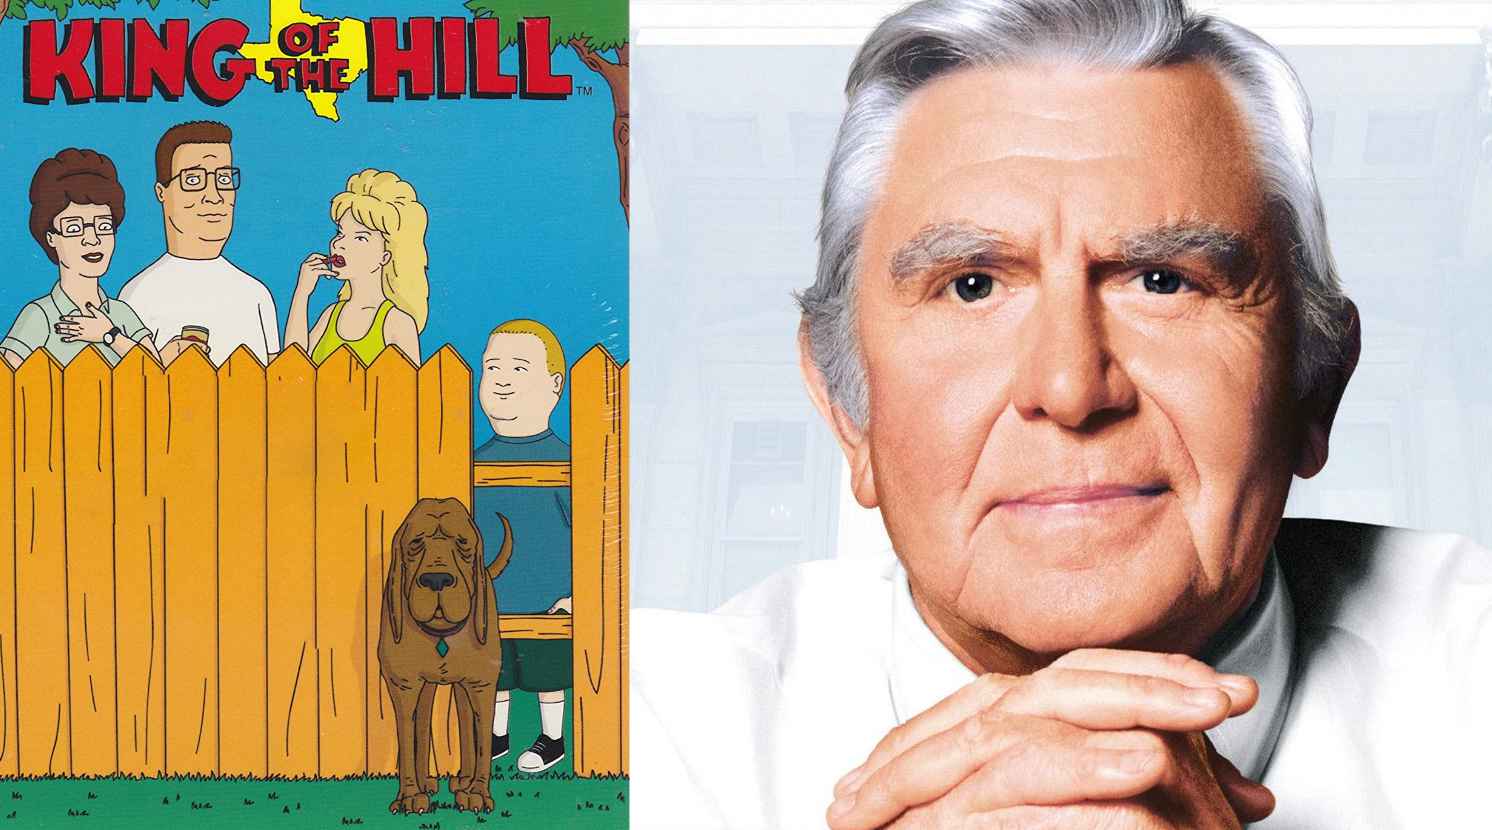 King Of The Hill - Matlock